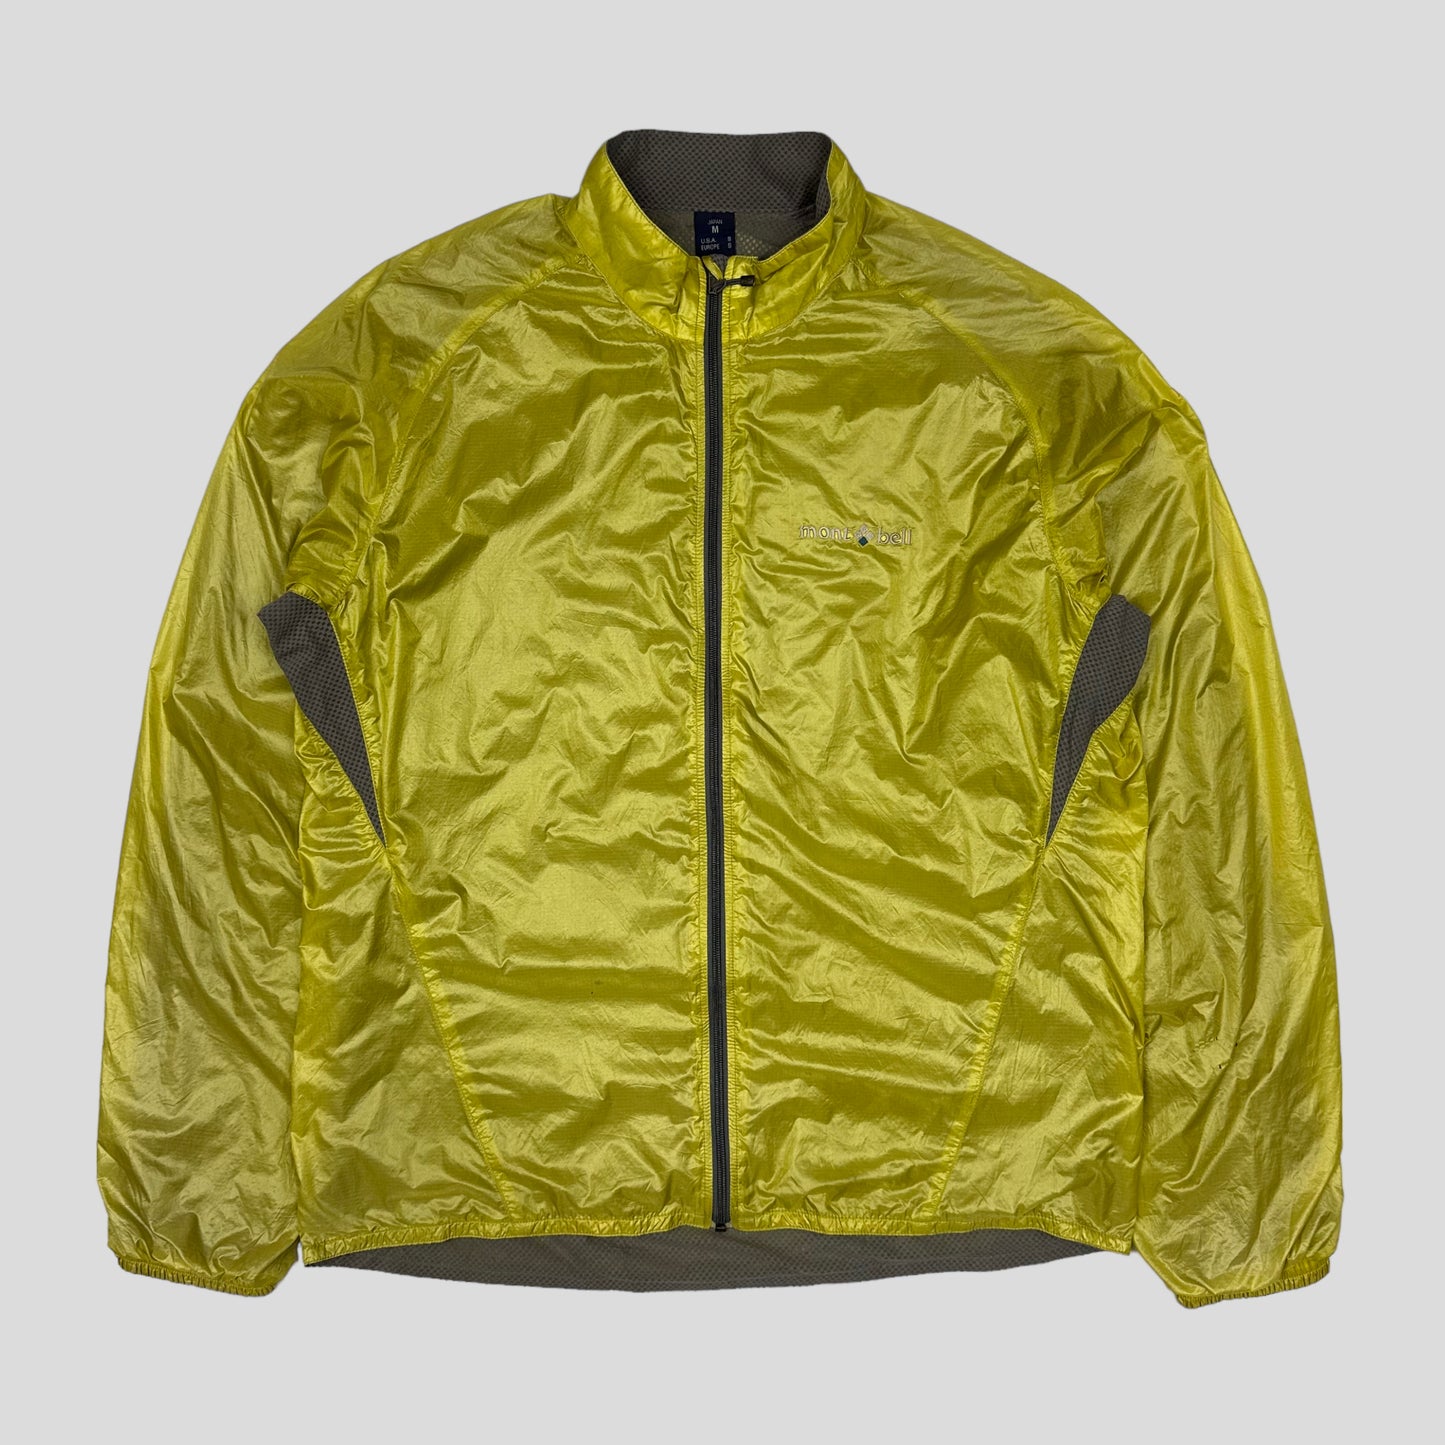 Mont-bell 90’s Glass Mesh Jacket - S/M